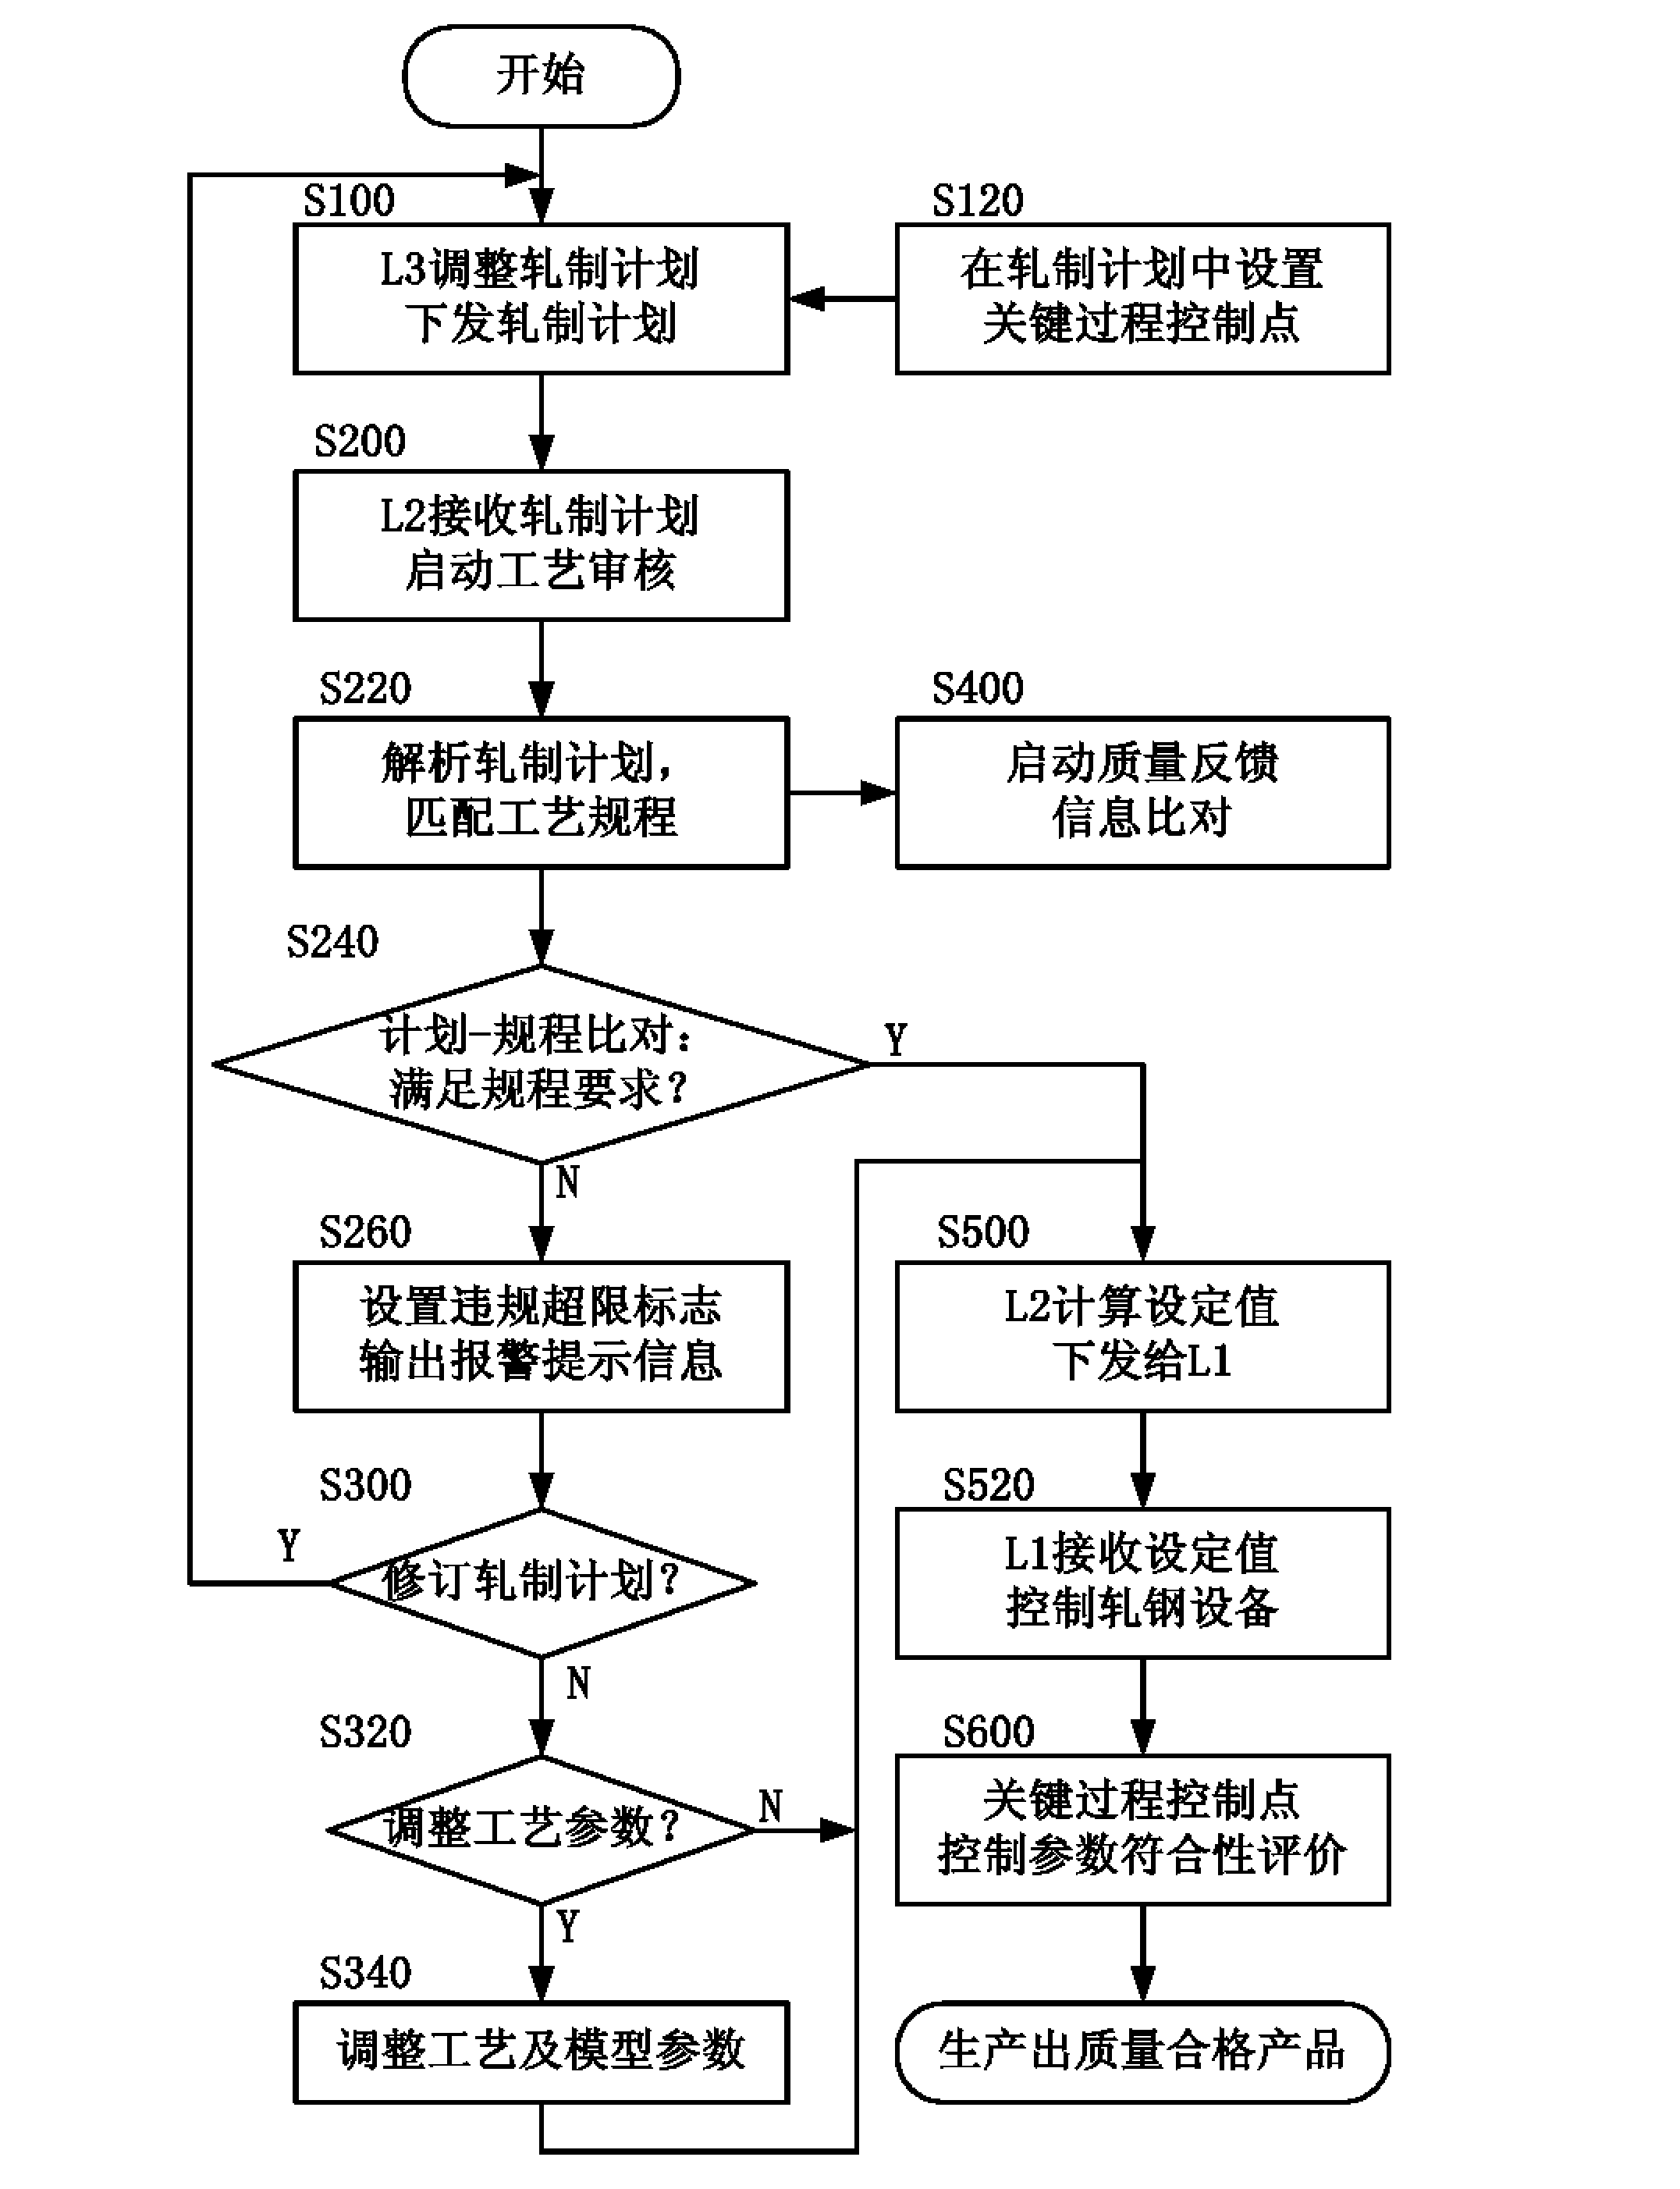 Online rolling plan dynamic pre-analysis and self-adjustment system and method